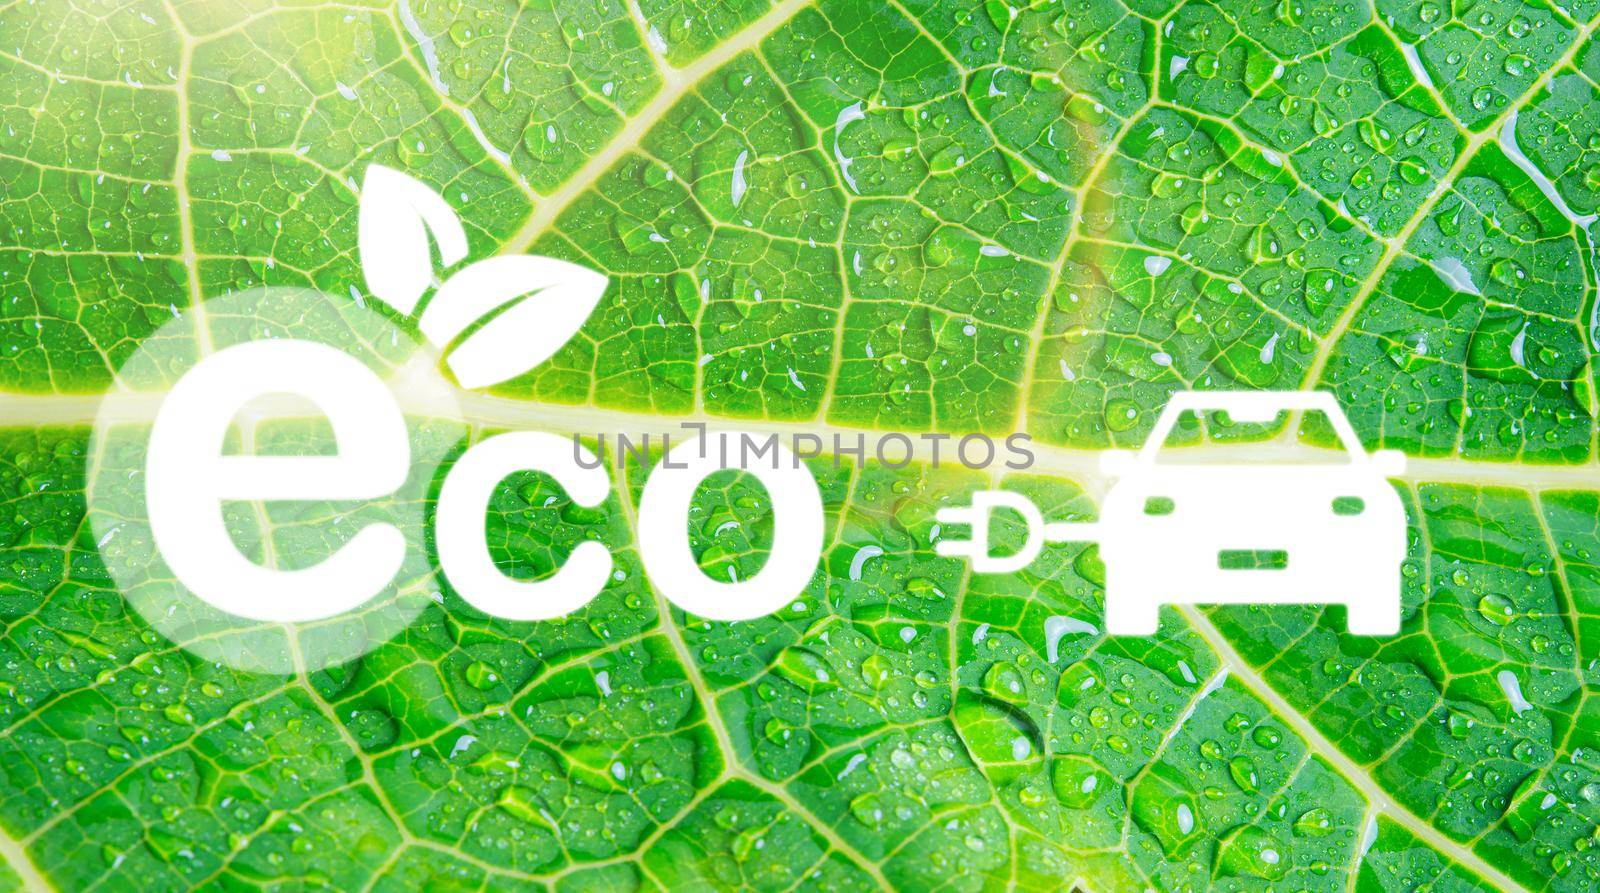 Electric car and Eco environment Icons shape on green leaf by Sorapop